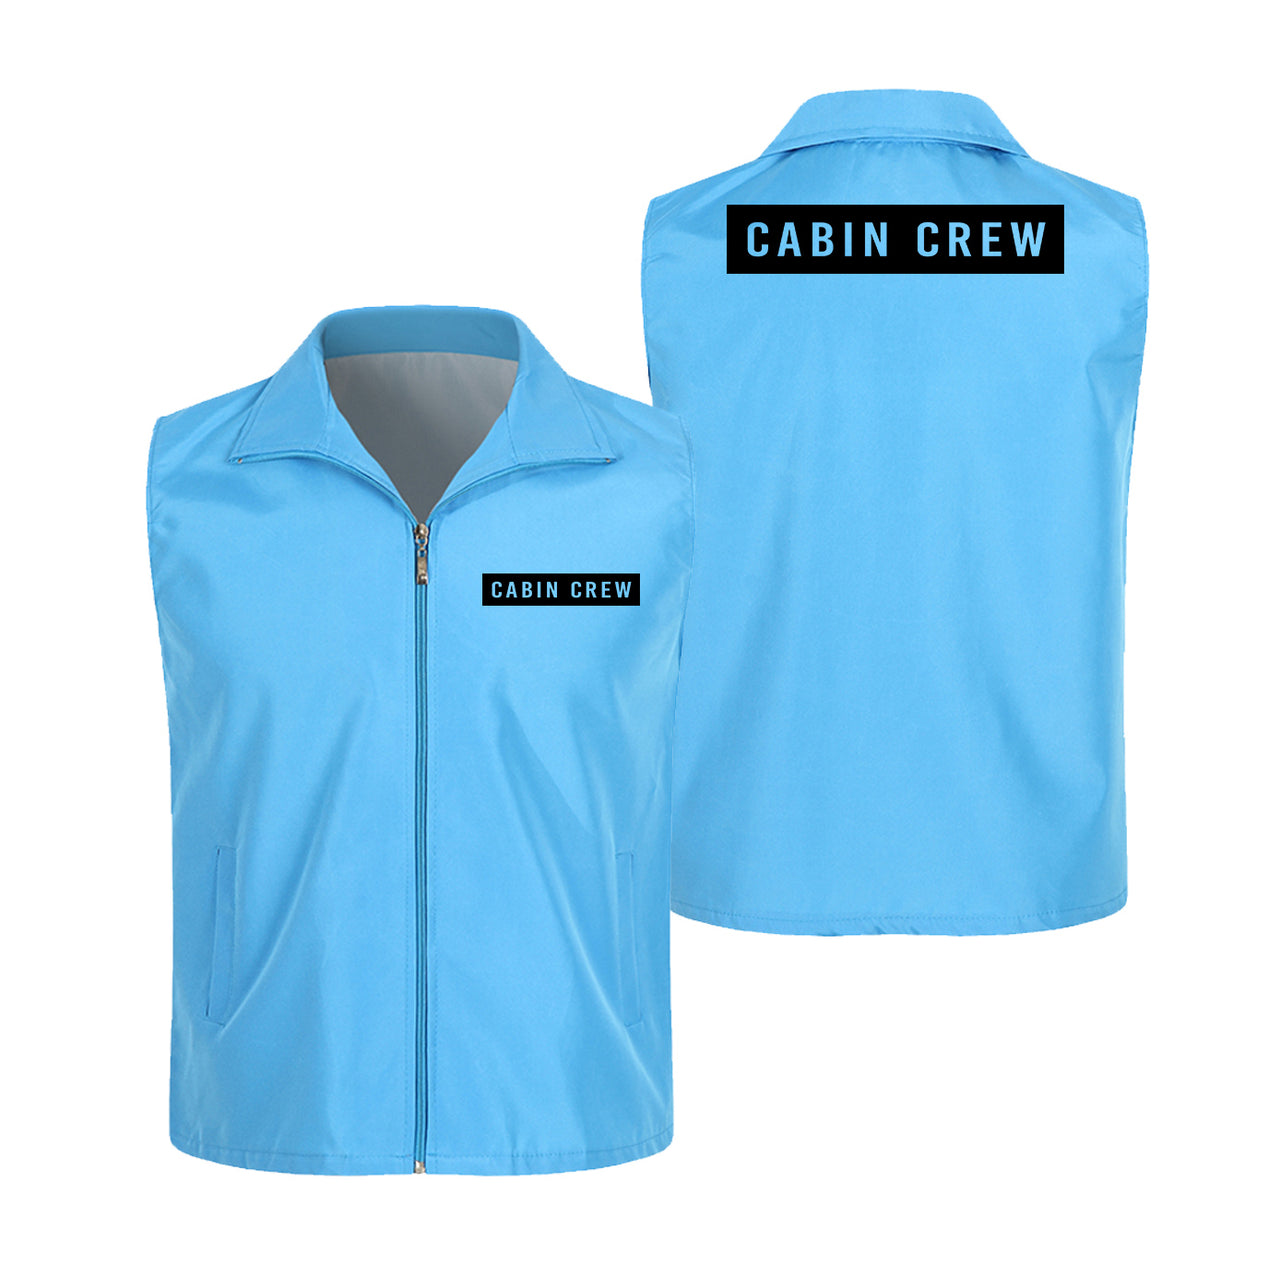 Cabin Crew Text Designed Thin Style Vests